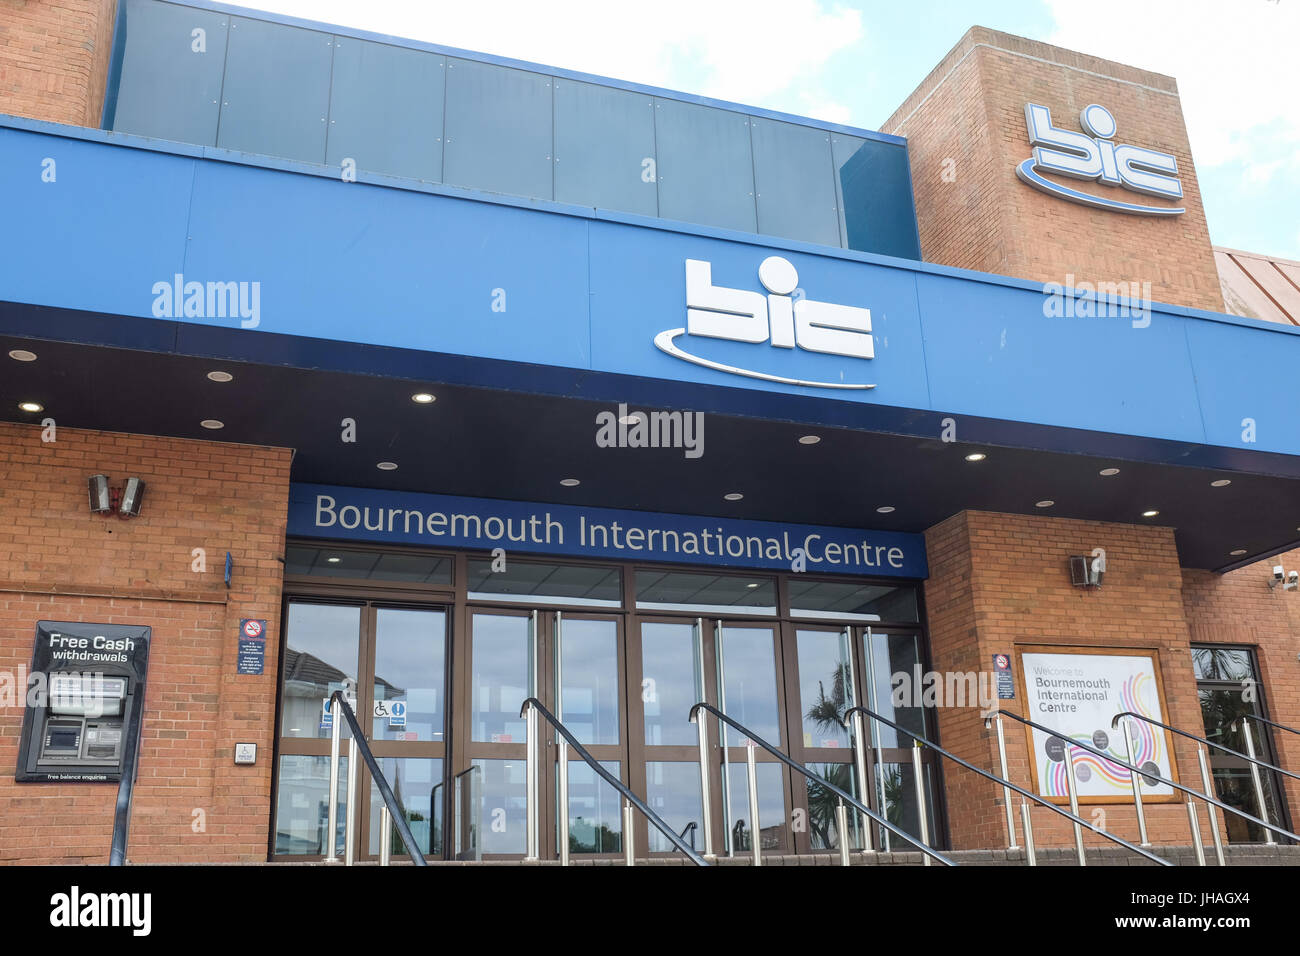 The entrance to the Bournemouth International Centre in Bournemouth, England. Stock Photo